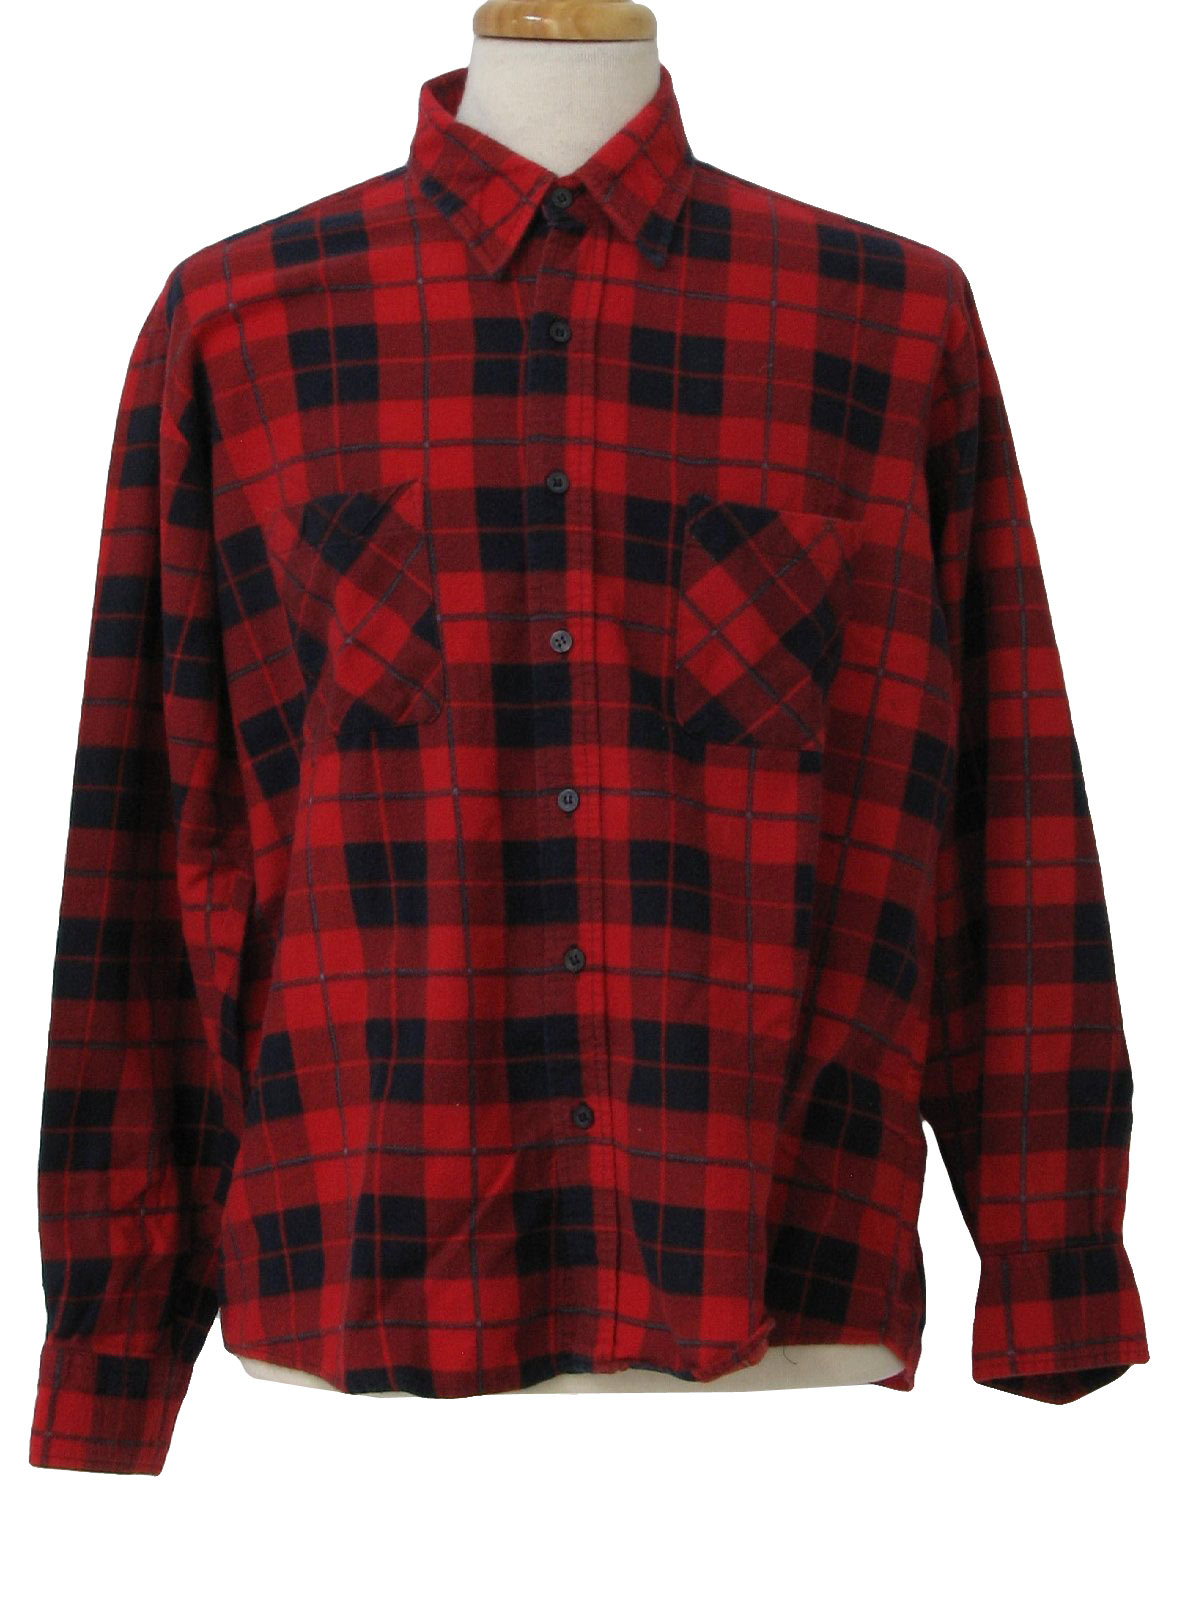 Retro 90s Shirt (Timber Trail) : 90s -Timber Trail- Mens navy and red ...